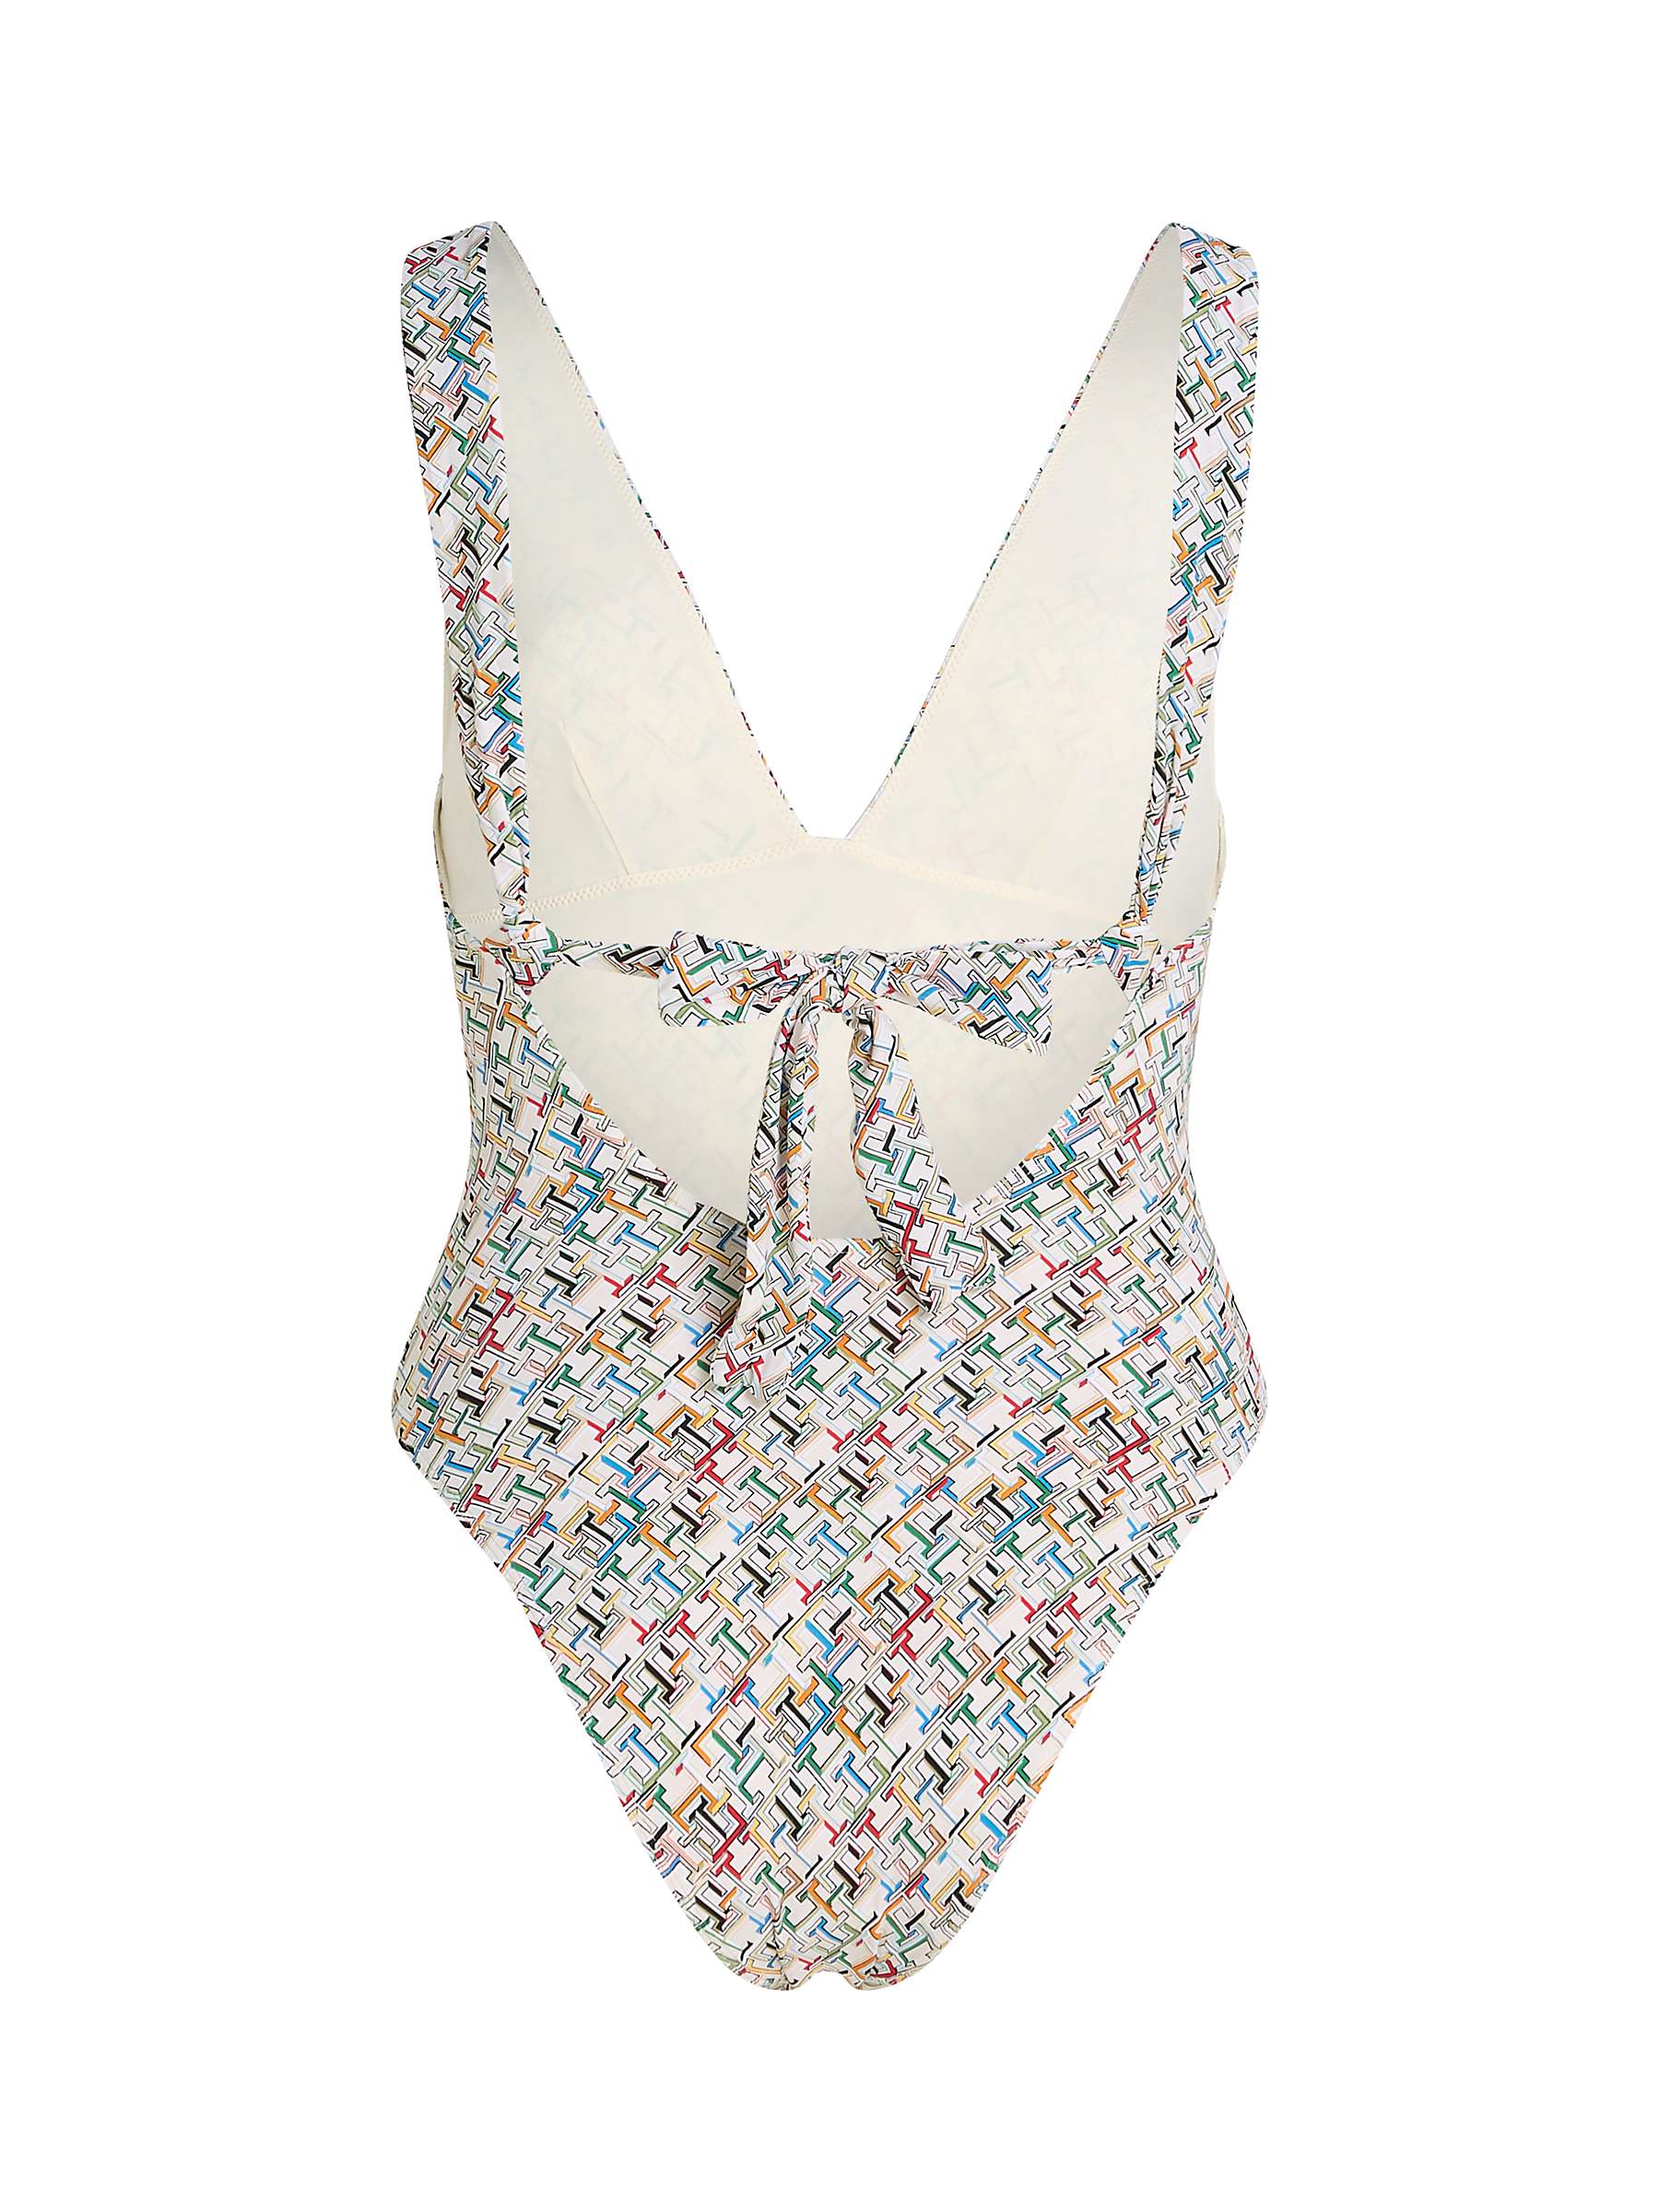 Buy Tommy Hilfiger Plunge Swimsuit, Multi Mon Calico Online at johnlewis.com